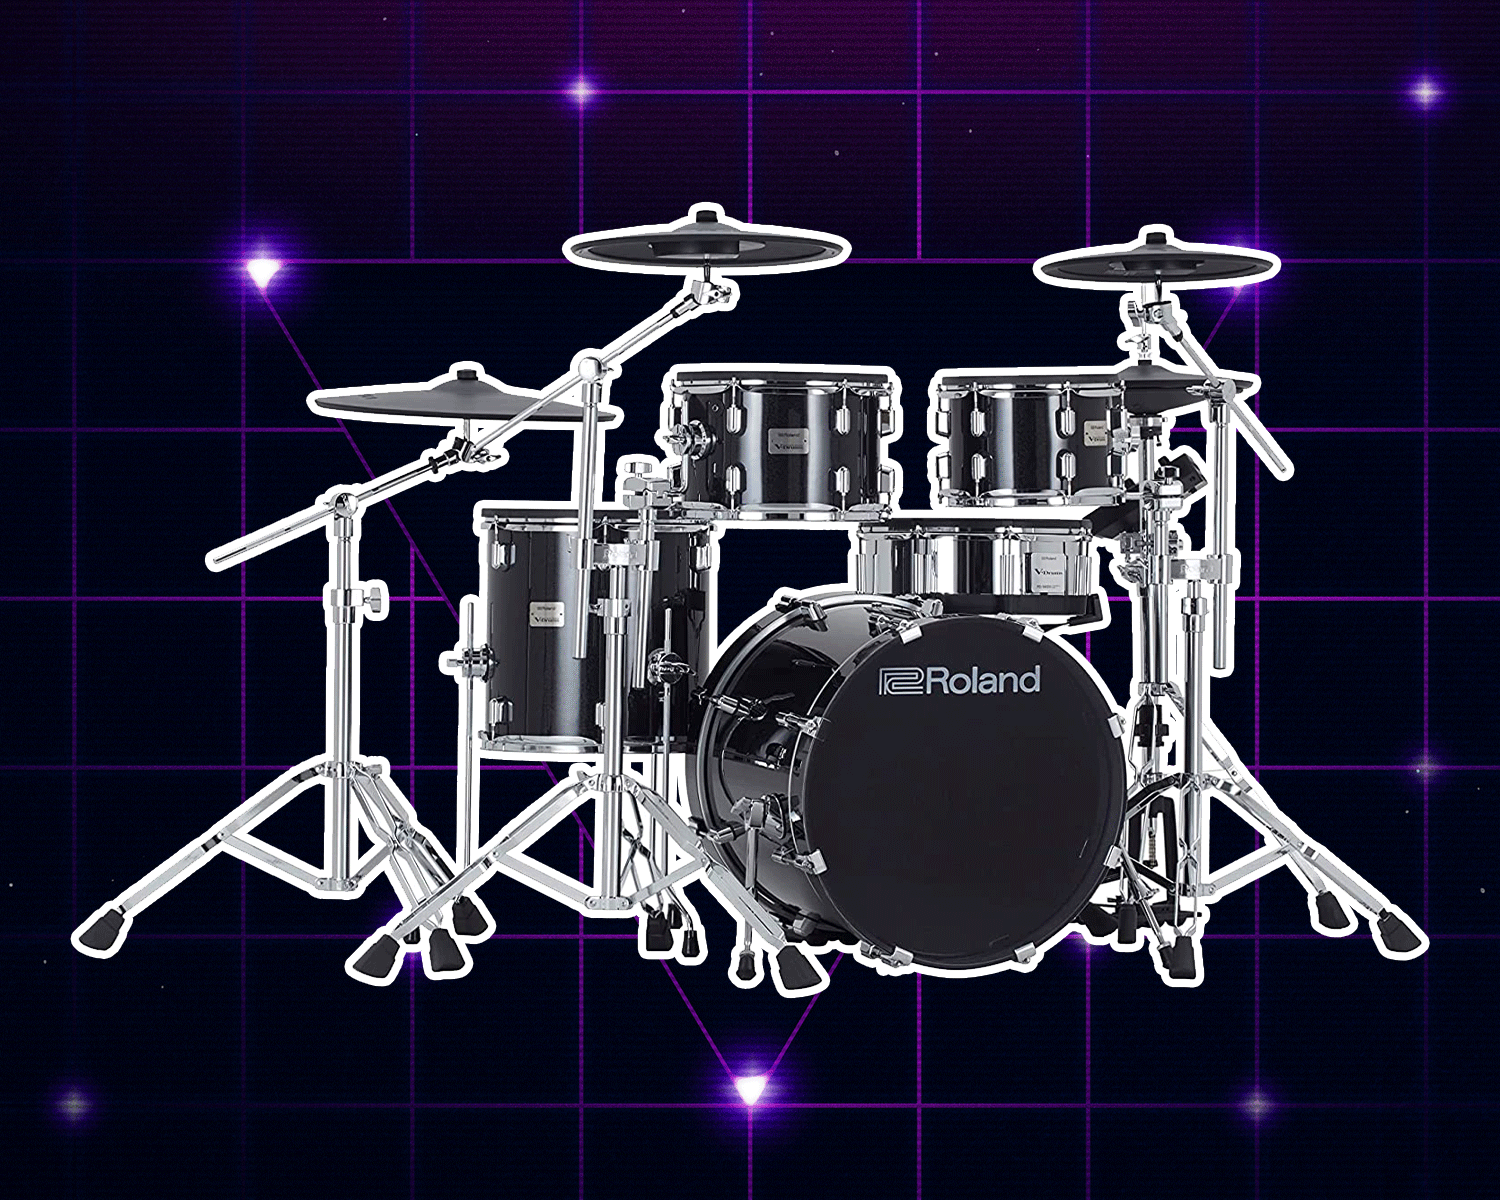 New drum kit! These stainless steel shells are LOUD. : r/drums